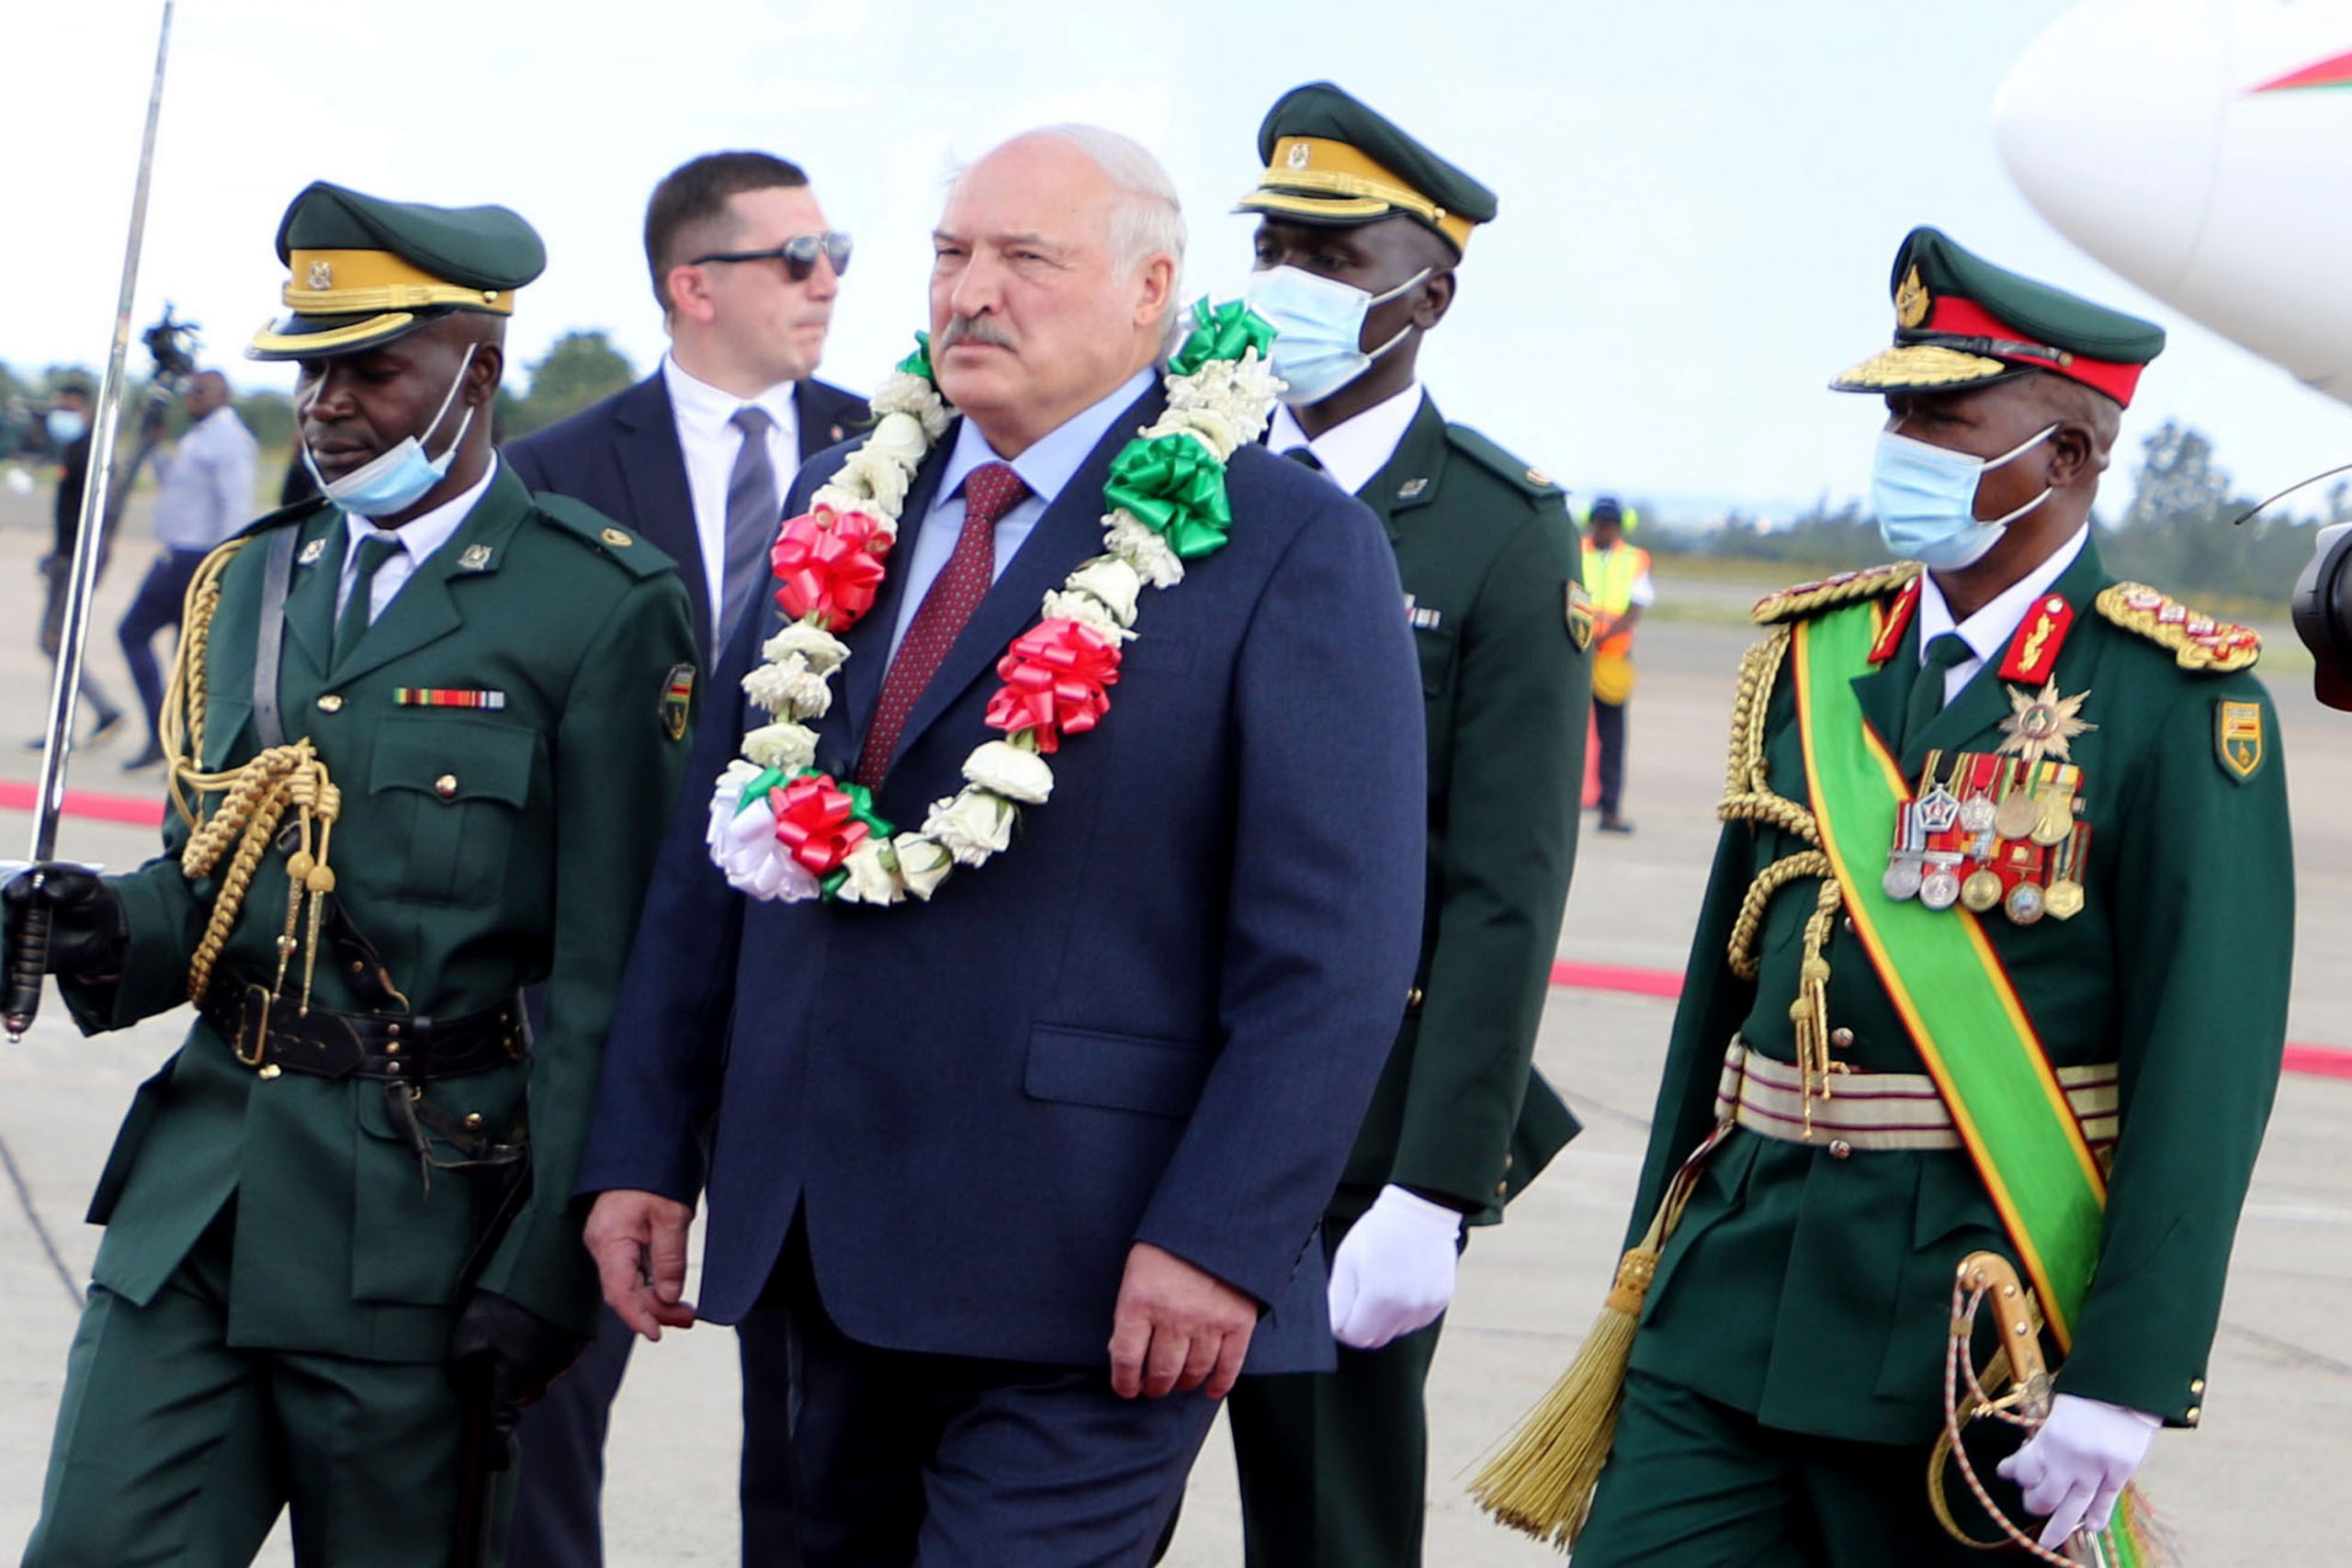 epa10440306 Belarusian President Alexander Lukashenko (C) inspects guards of honor upon arrival at the Robert Mugabe International airport in Harare, Zimbabwe, 30 January 2023. Lukashenko arrived on a two-day state visit to Zimbabwe, the first by Lukashenko to a Sub-Saharan African nation, during which he will have talks on strengthening bilateral ties.  EPA/AARON UFUMELI